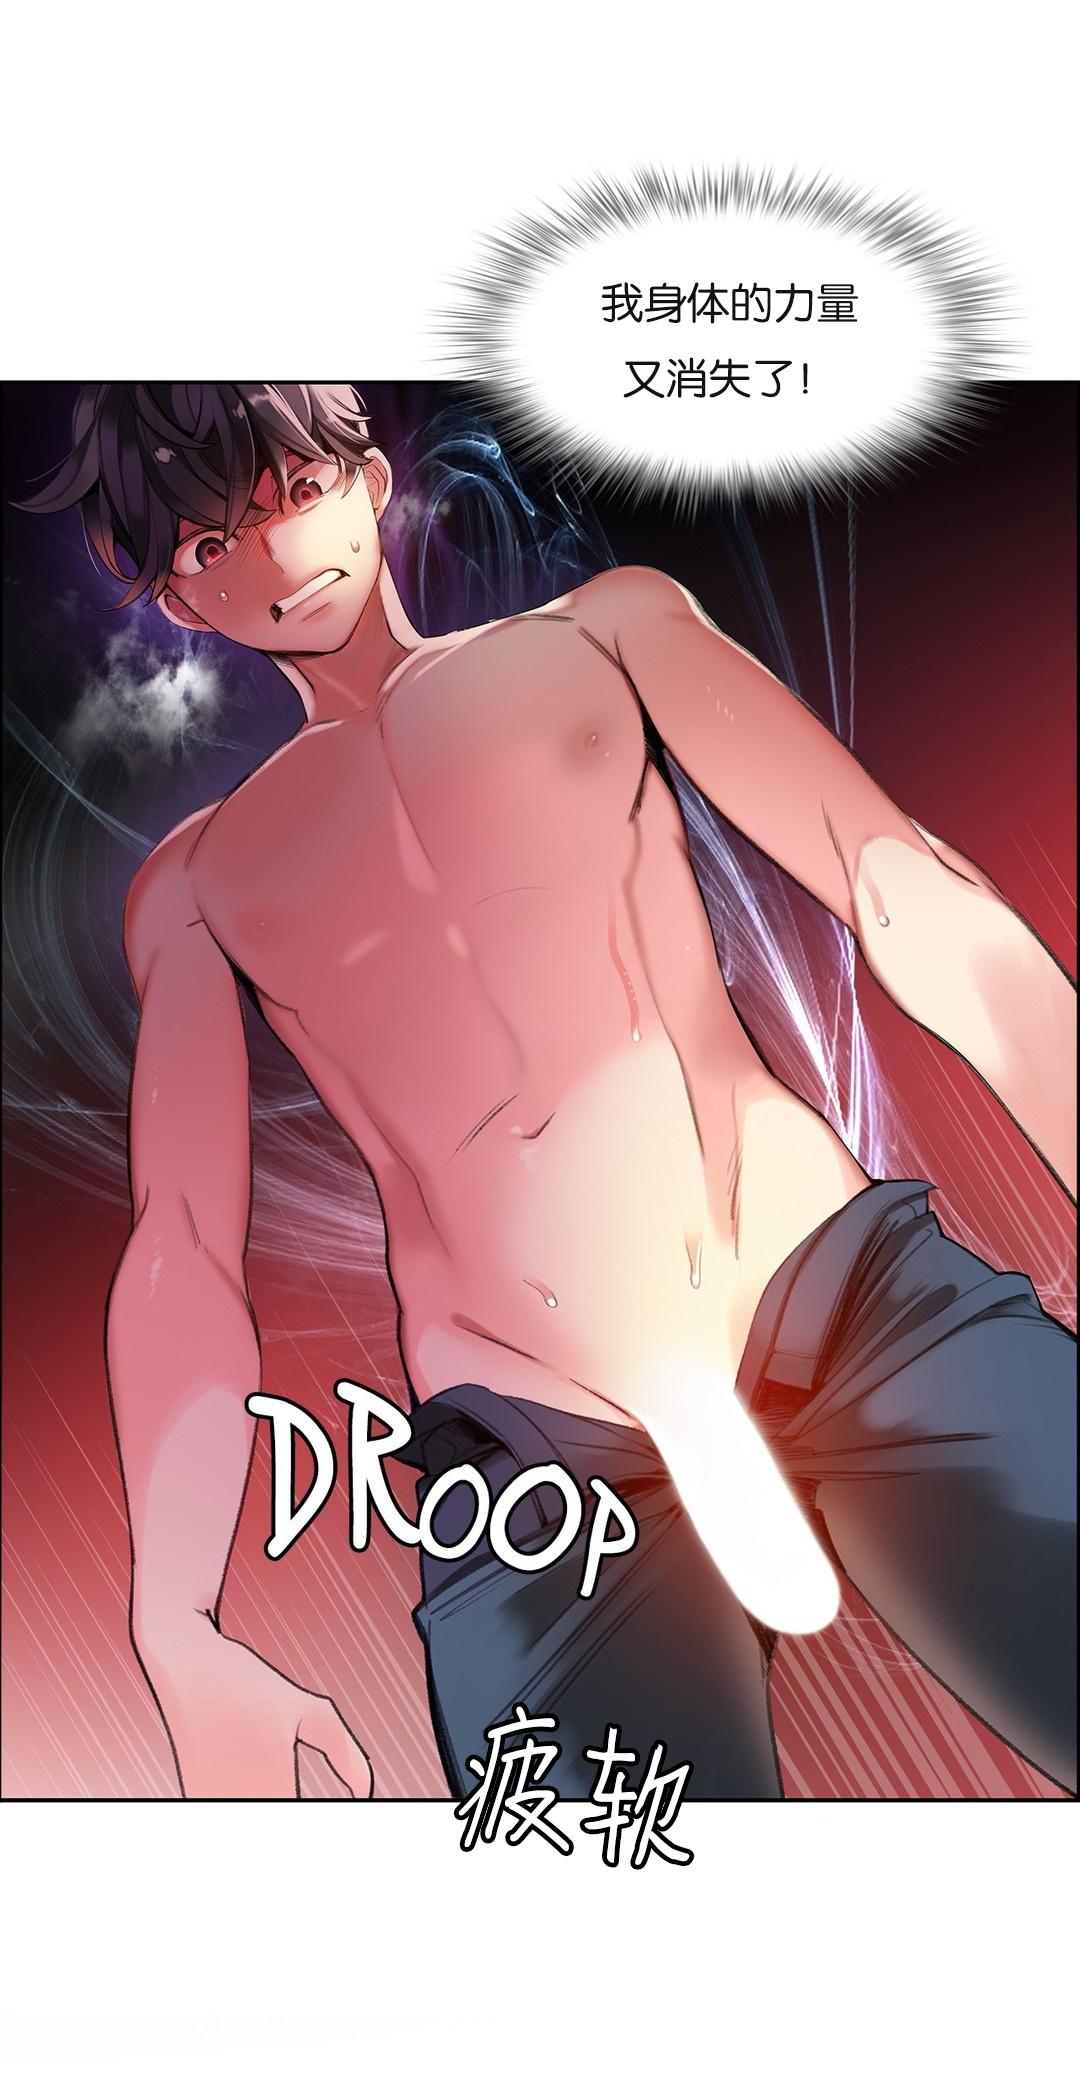 [Juder] Lilith`s Cord (第二季) Ch.61-64 [Chinese] [aaatwist个人汉化] [Ongoing] 141